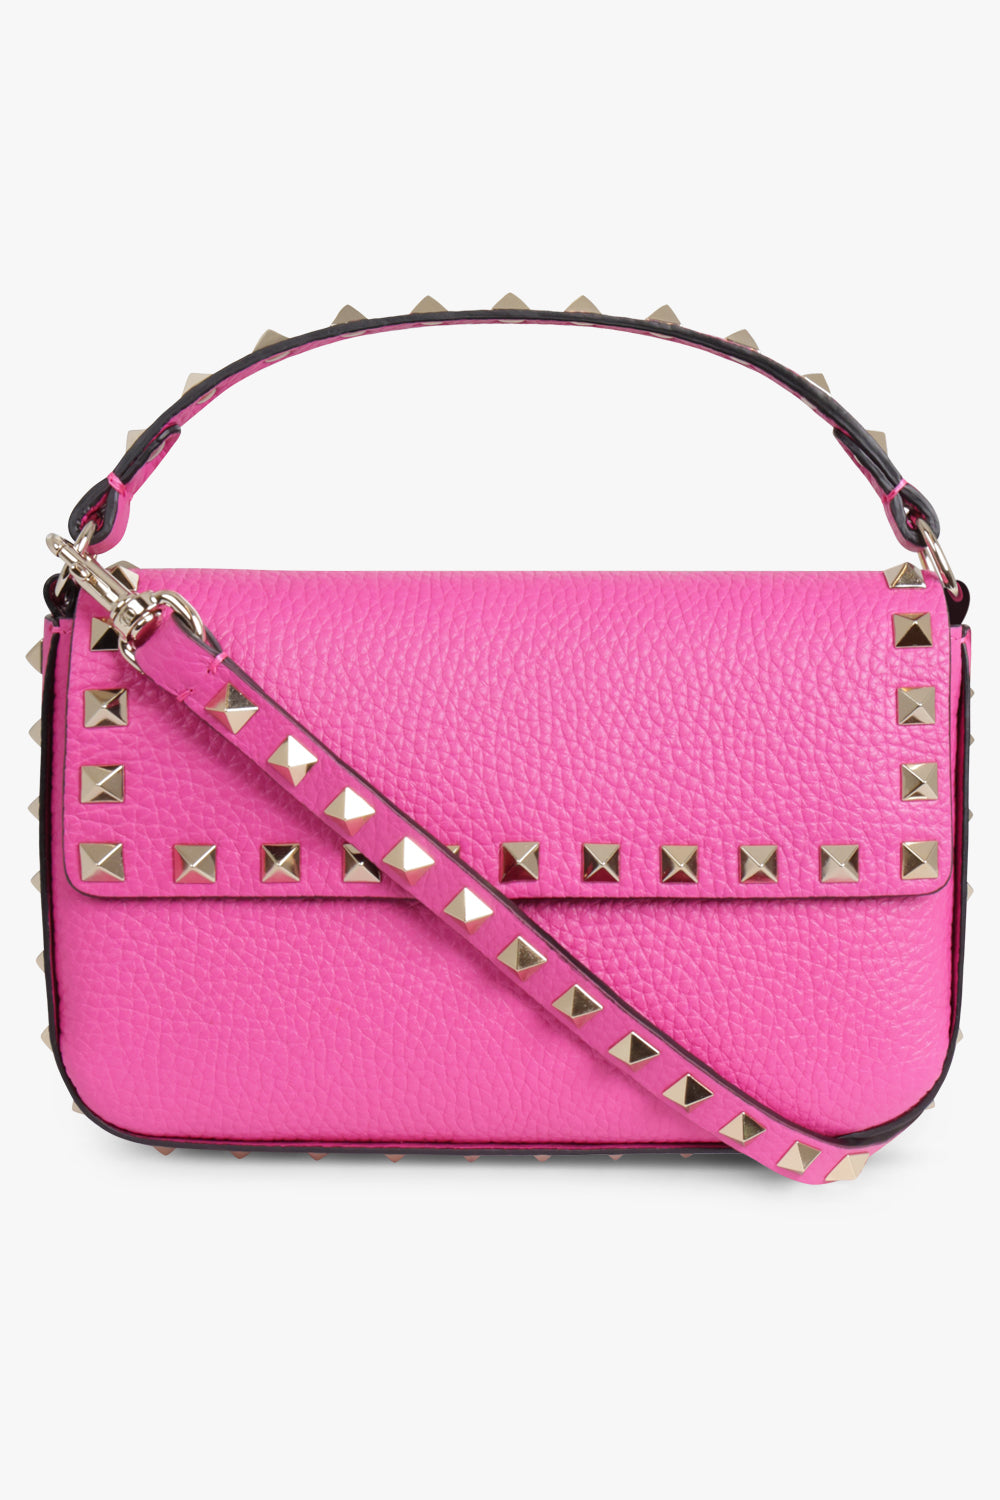 VALENTINO BAGS Pink Rockstud Pouch | Platinum/Pink Pp